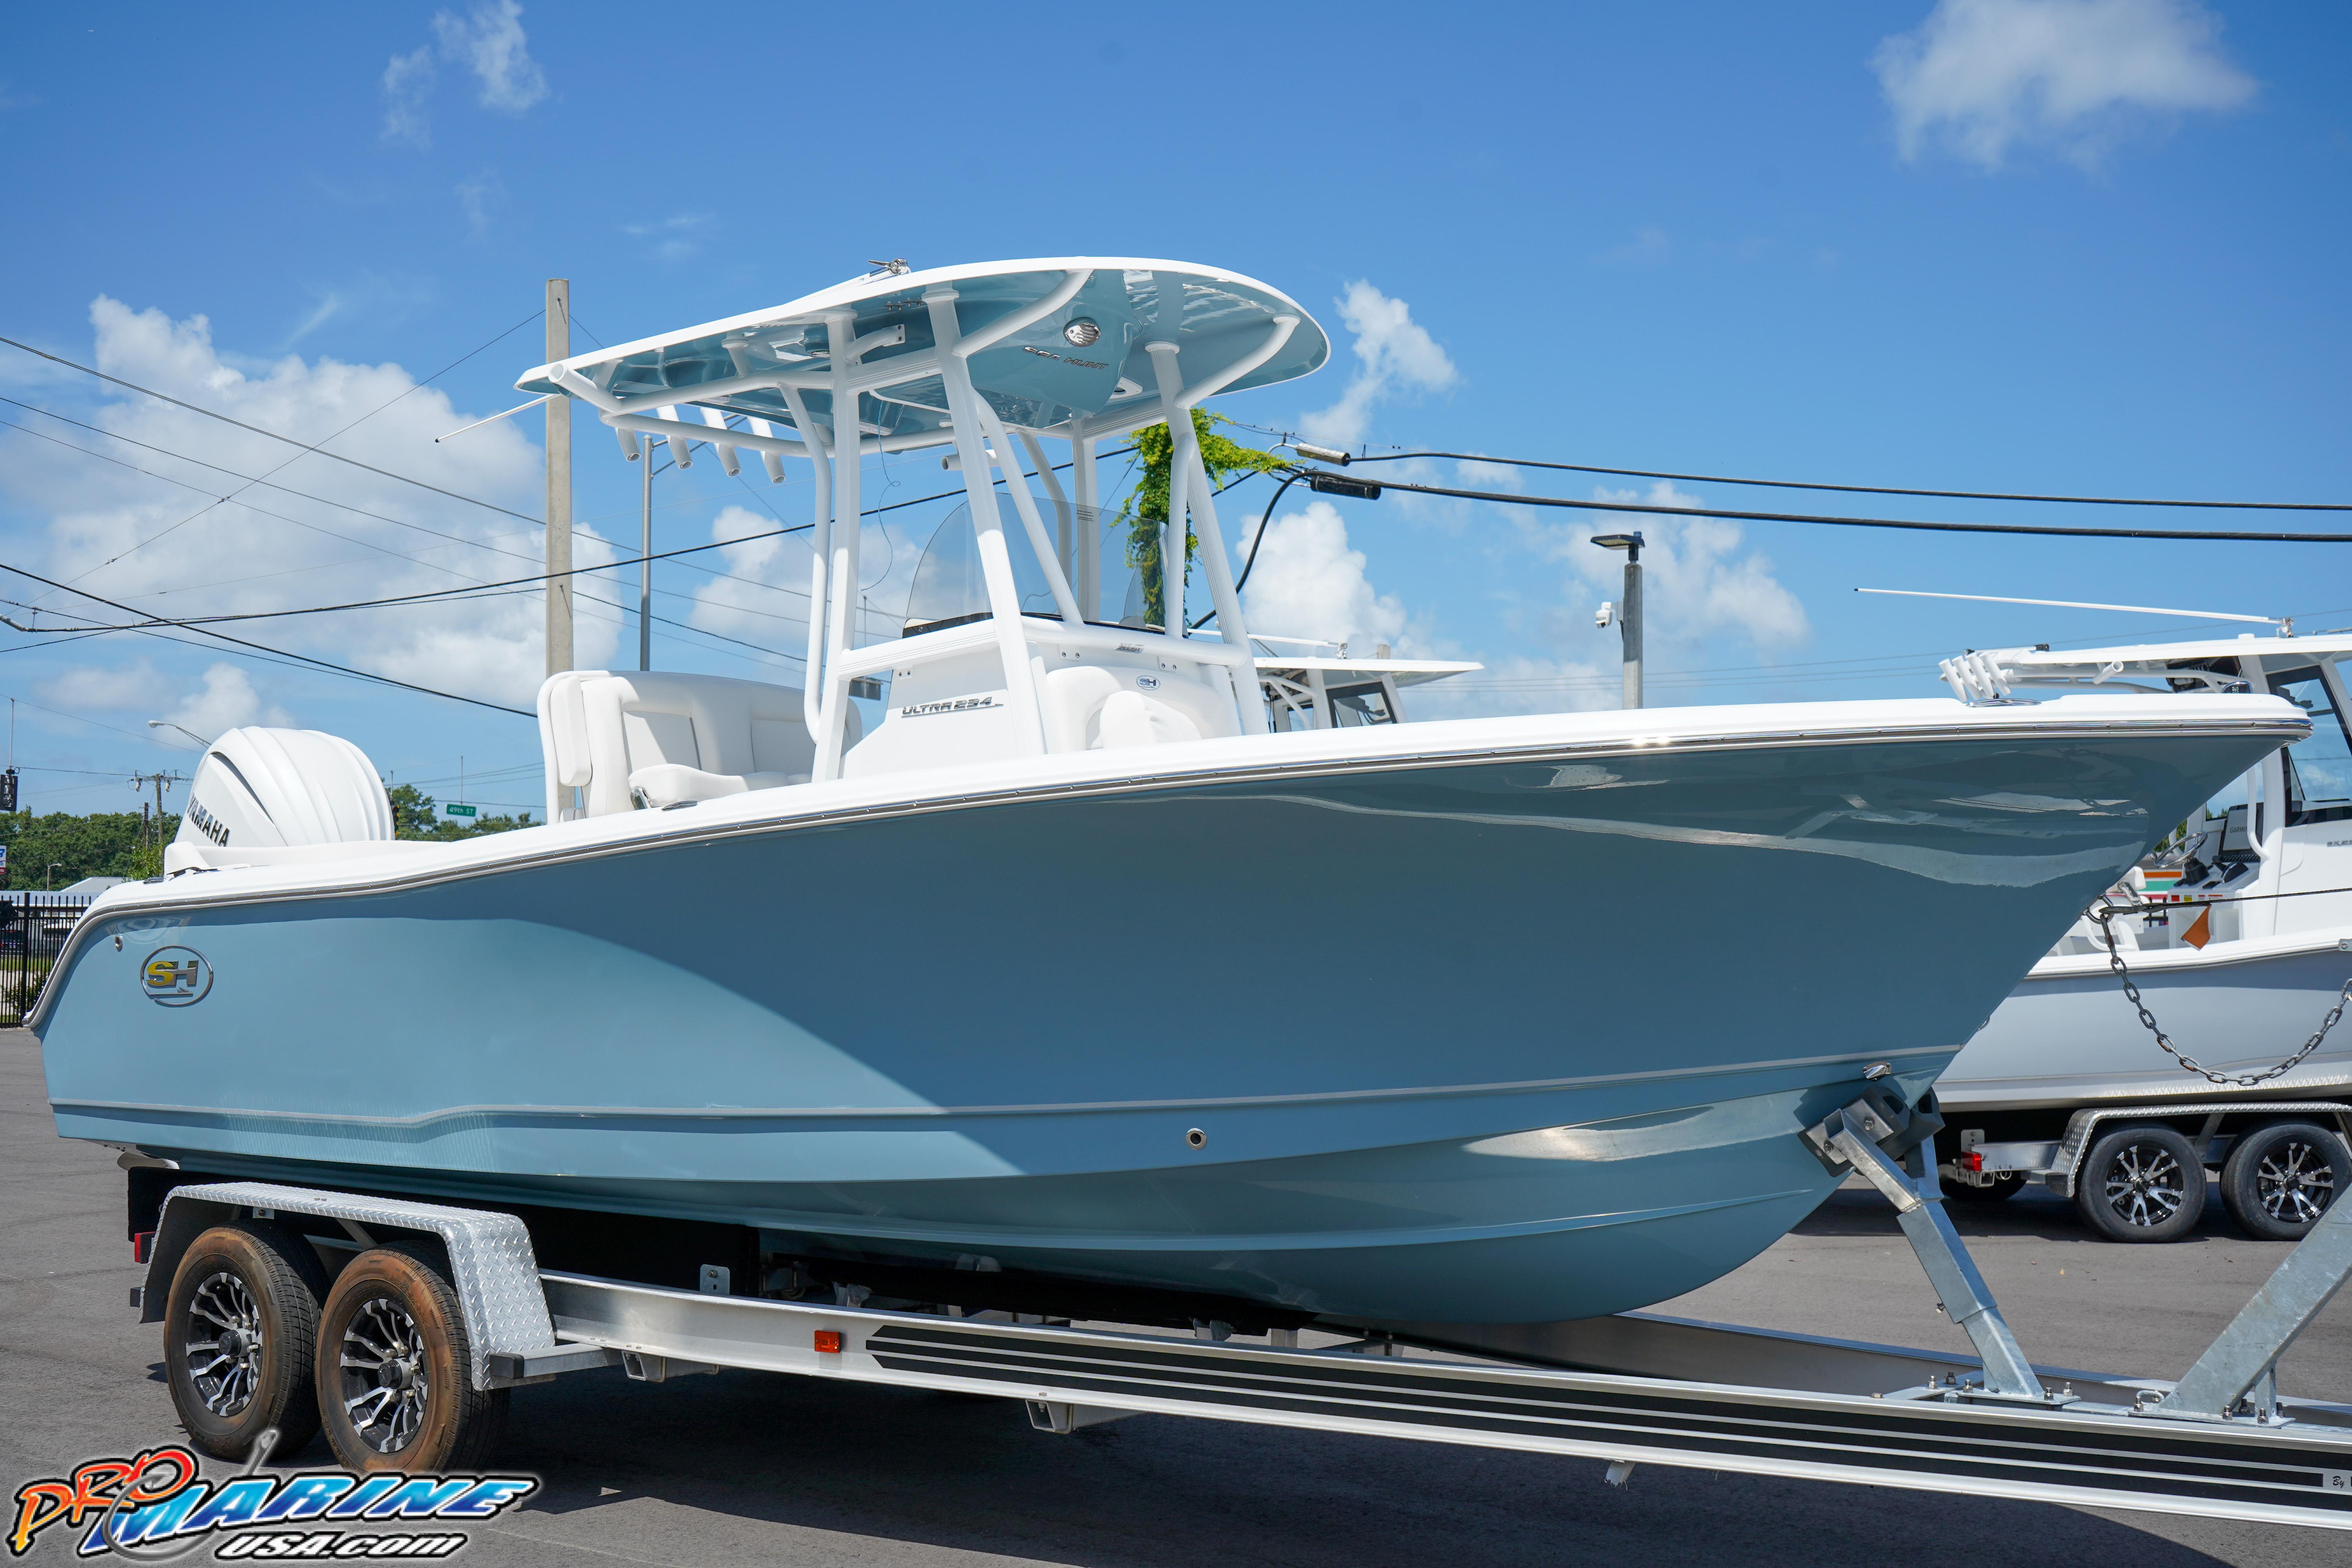 Must Have Boating Accessories for 2022 – Hunts Marine